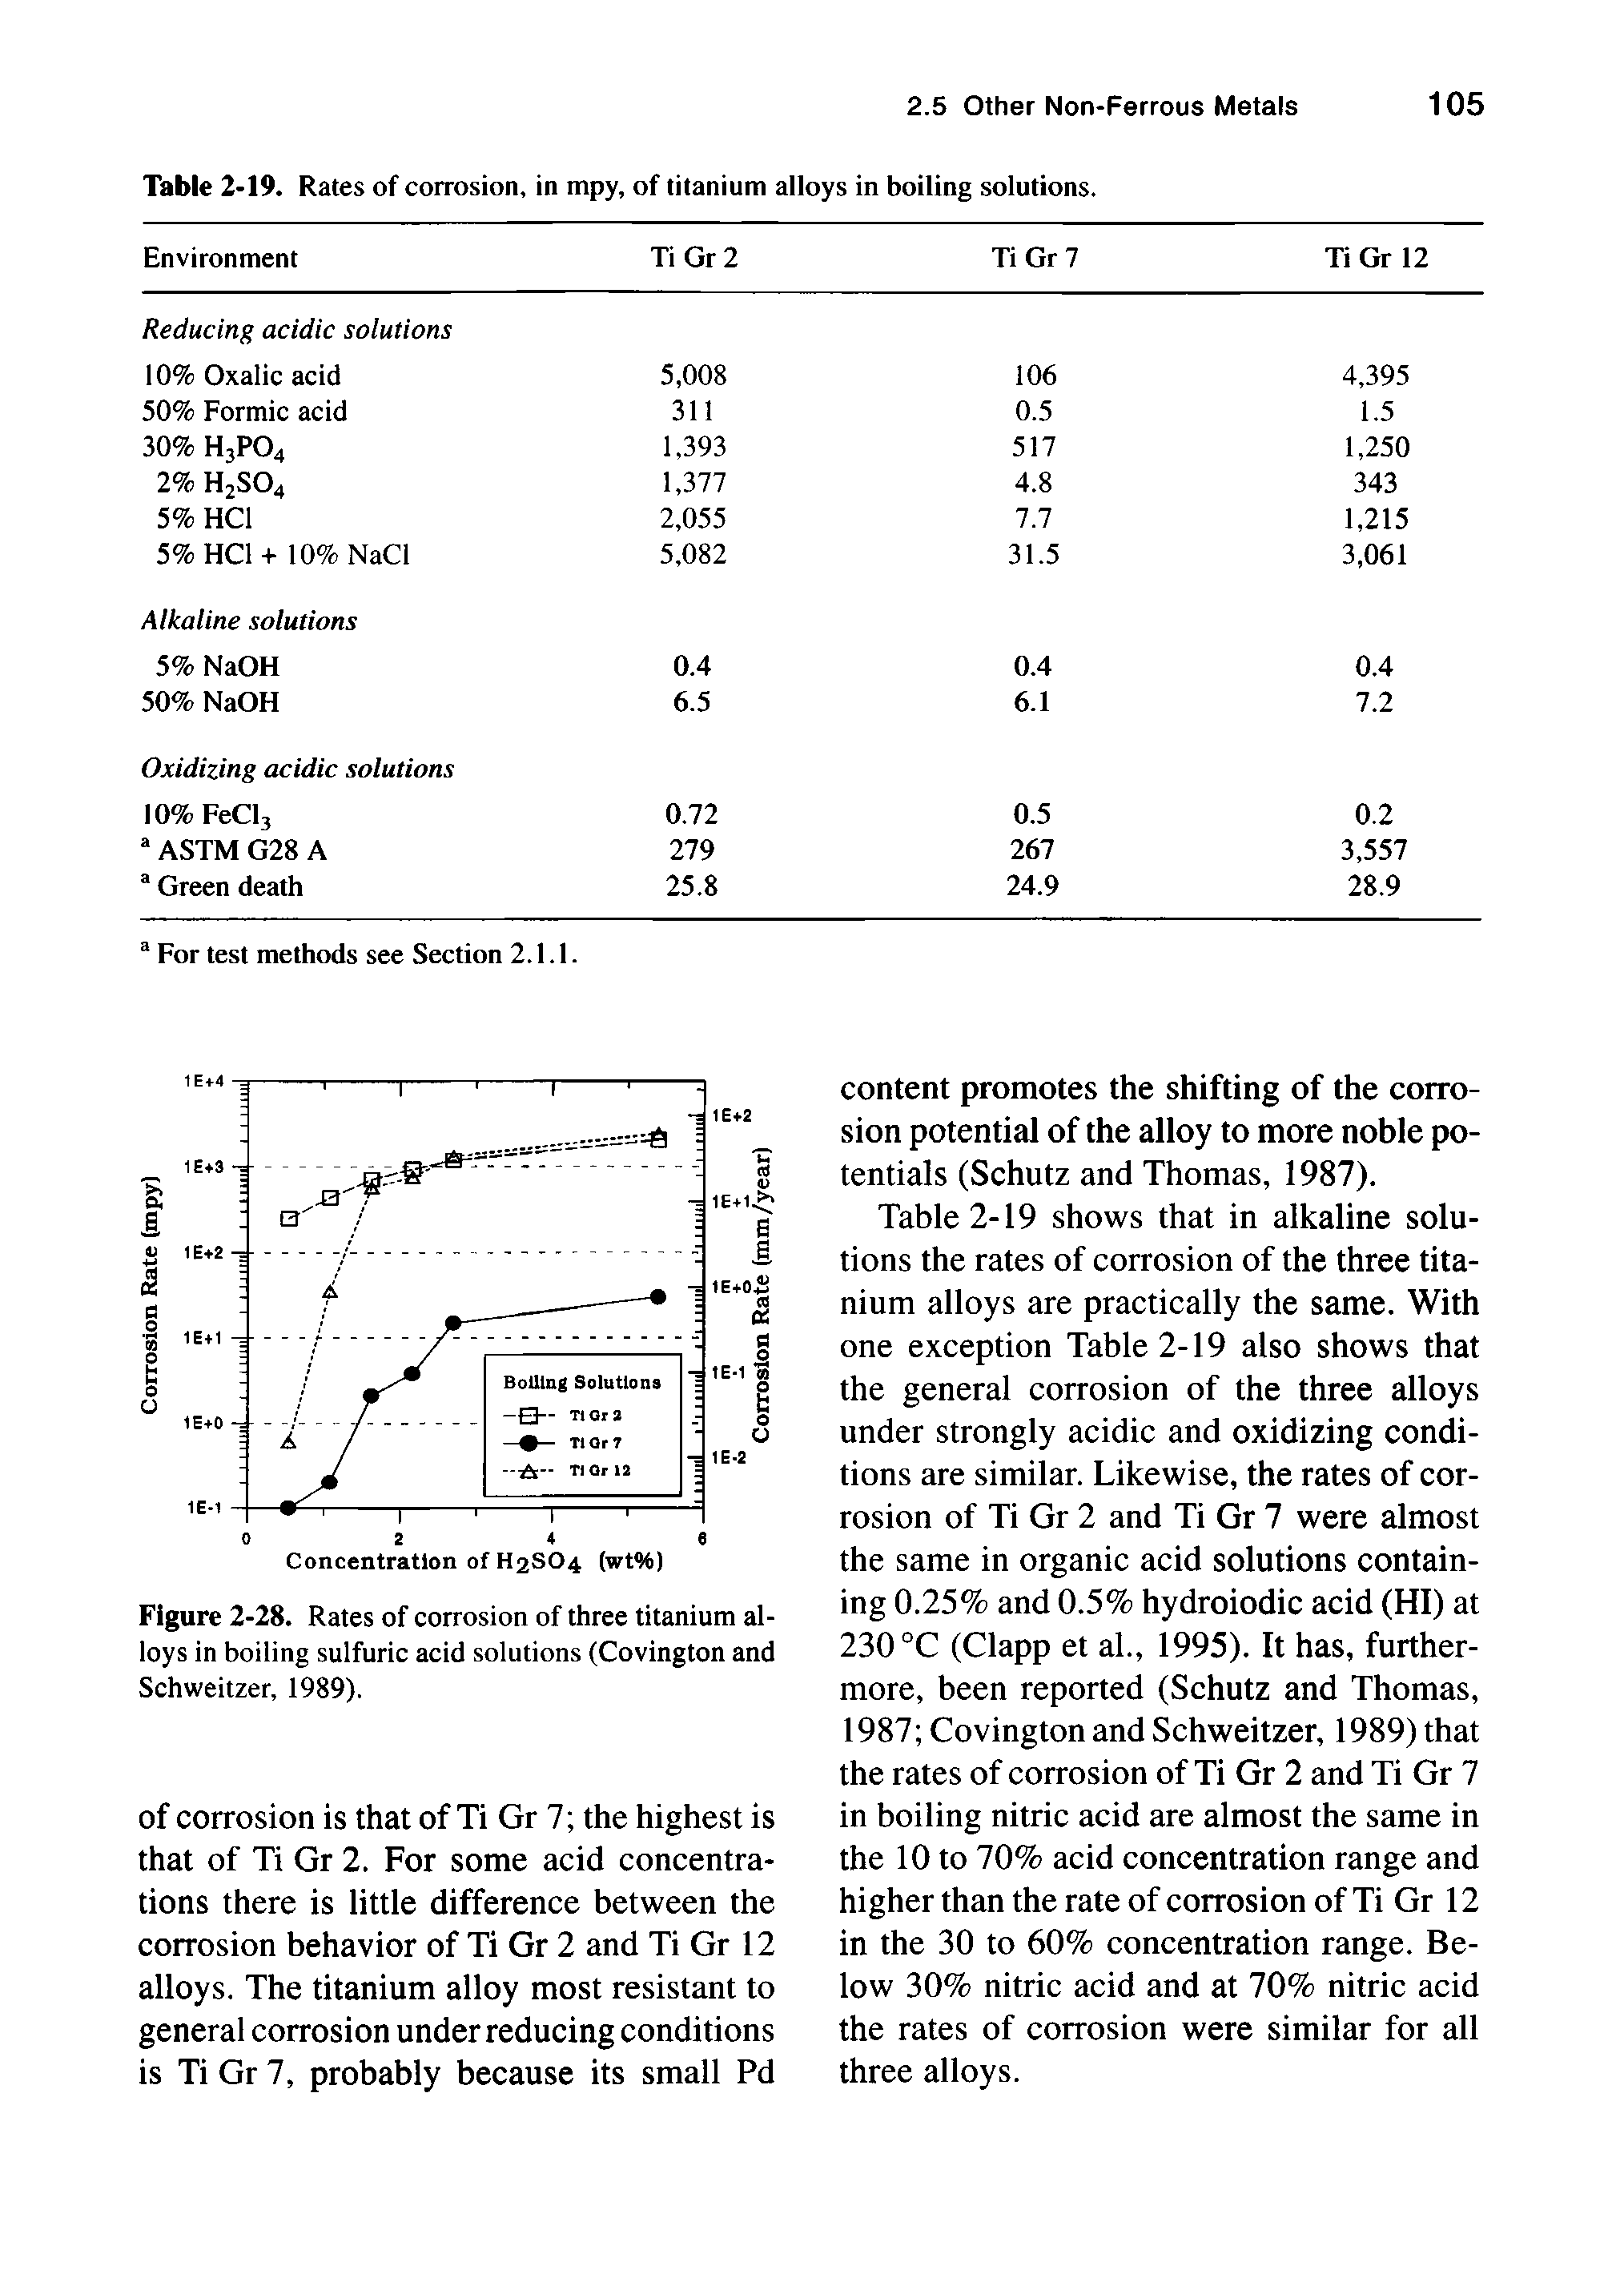 Figure 2-28. Rates of corrosion of three titanium alloys in boiling sulfuric acid solutions (Covington and Schweitzer, 1989).